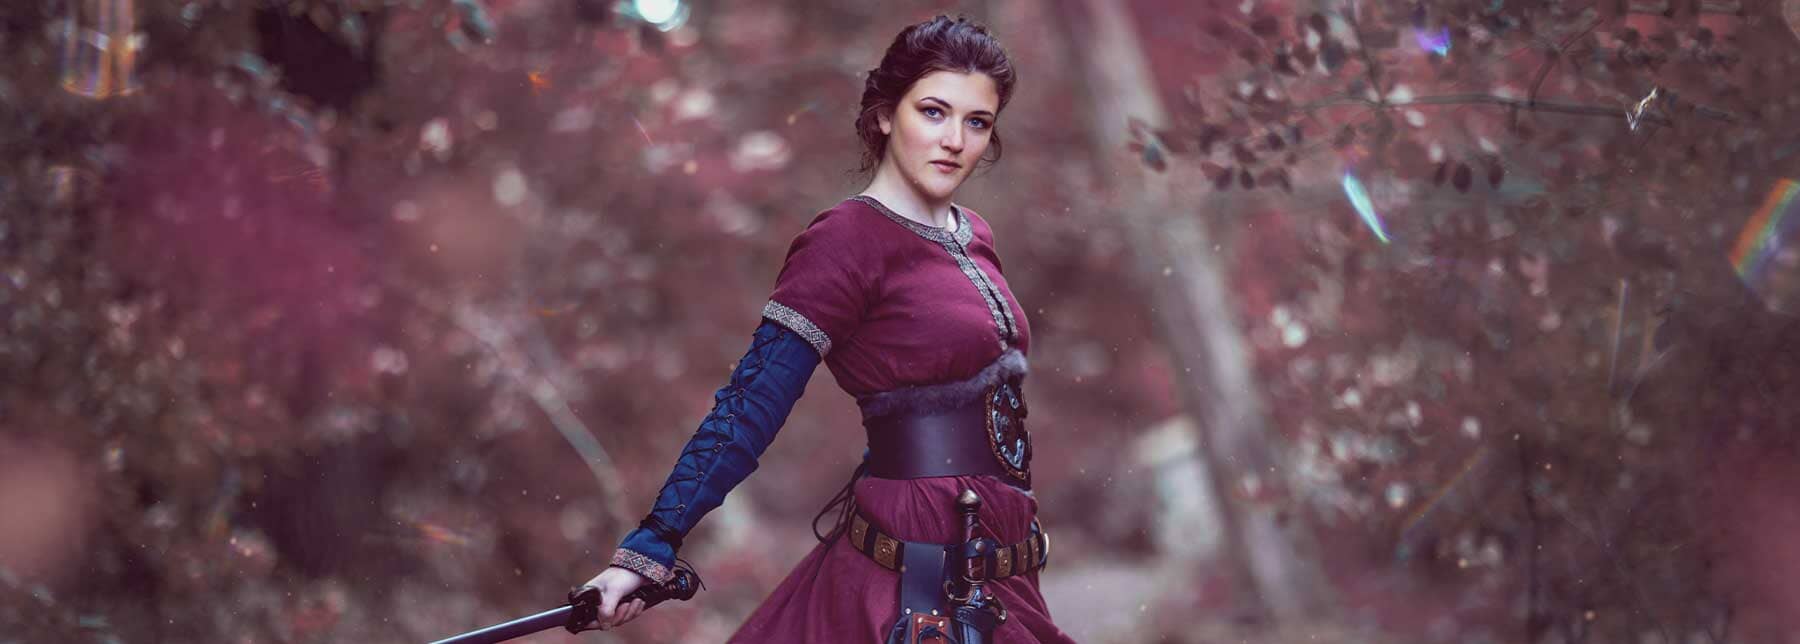 Medieval Women's Clothing for LARP